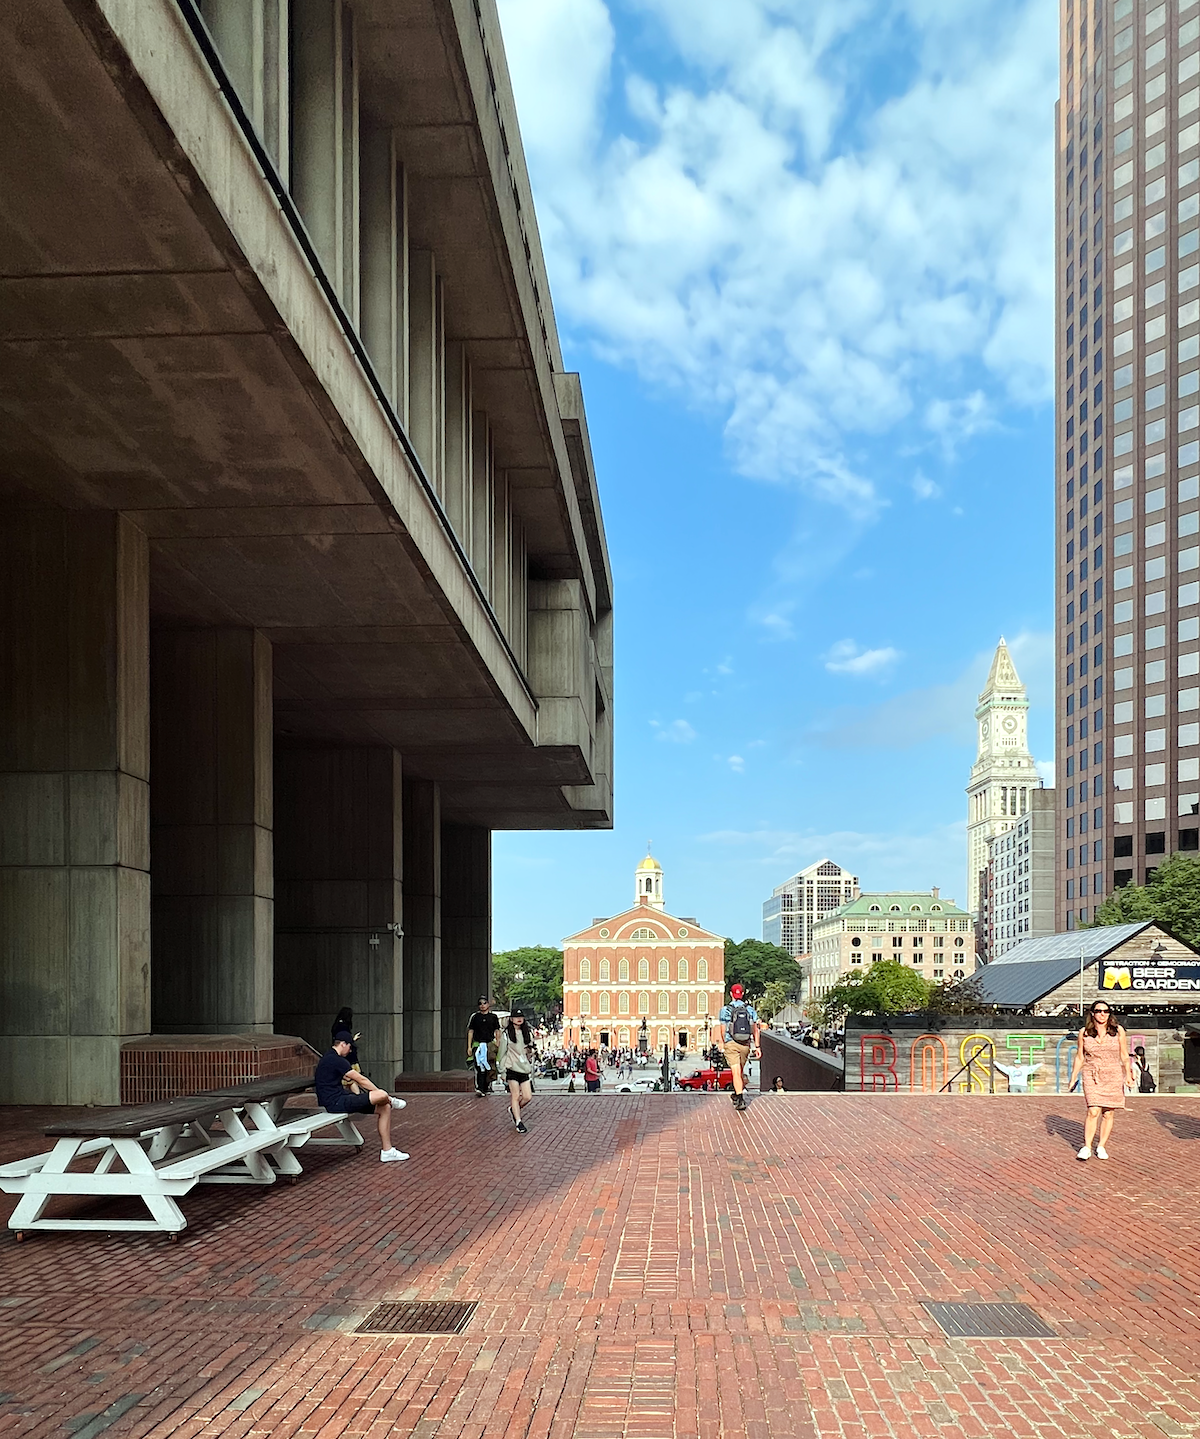 Warm, and welcoming Boston's City Hall prison - Faneuil Hall (center)